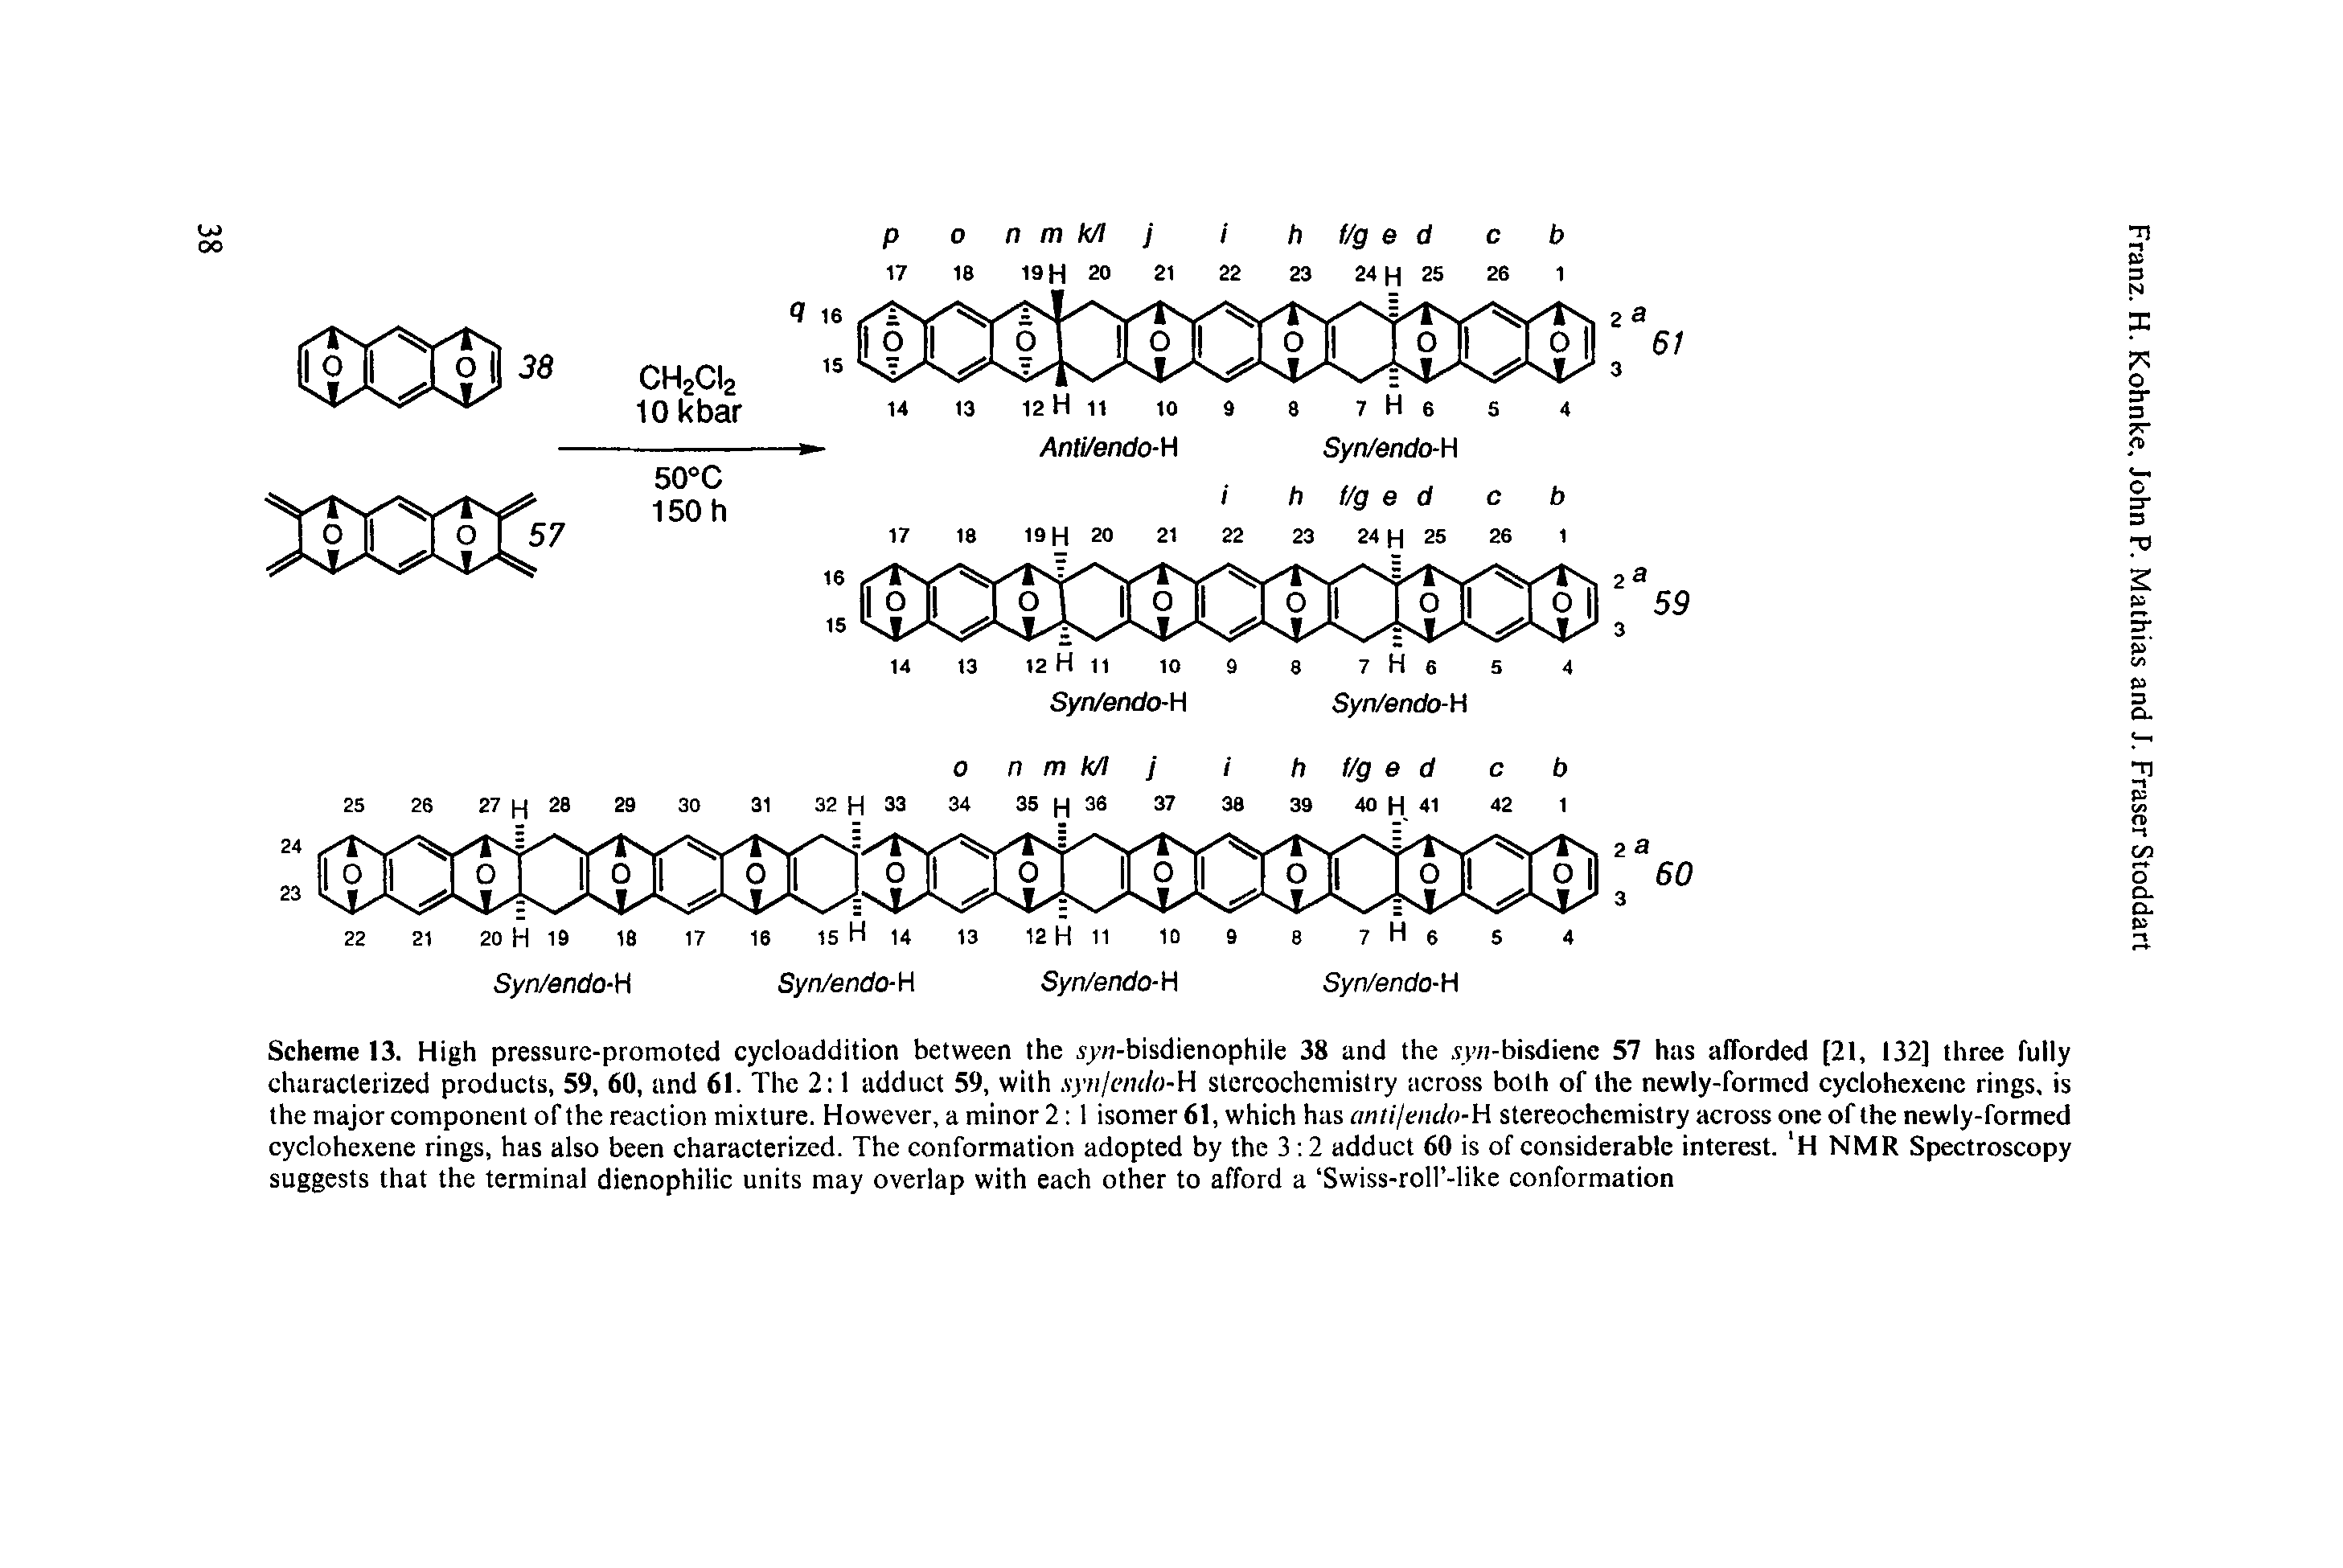 Scheme 13. High pressure-promoted cycloaddition between the. syn-bisdienophile 38 and the. vy/i-bisdienc 57 has afforded [21, 132] three fully characterized products, 59, 60, and 61. The 2 1 adduct 59, with syn/entlo-H stereochemistry across both of the newly-formed cyclohexenc rings, is the major component of the reaction mixture. However, a minor 2 1 isomer 61, which has antijendo-H stereochemistry across one of the newly-formed cyclohexene rings, has also been characterized. The conformation adopted by the 3 2 adduct 60 is of considerable interest. H NMR Spectroscopy suggests that the terminal dienophilic units may overlap with each other to afford a Swiss-roll -like conformation...